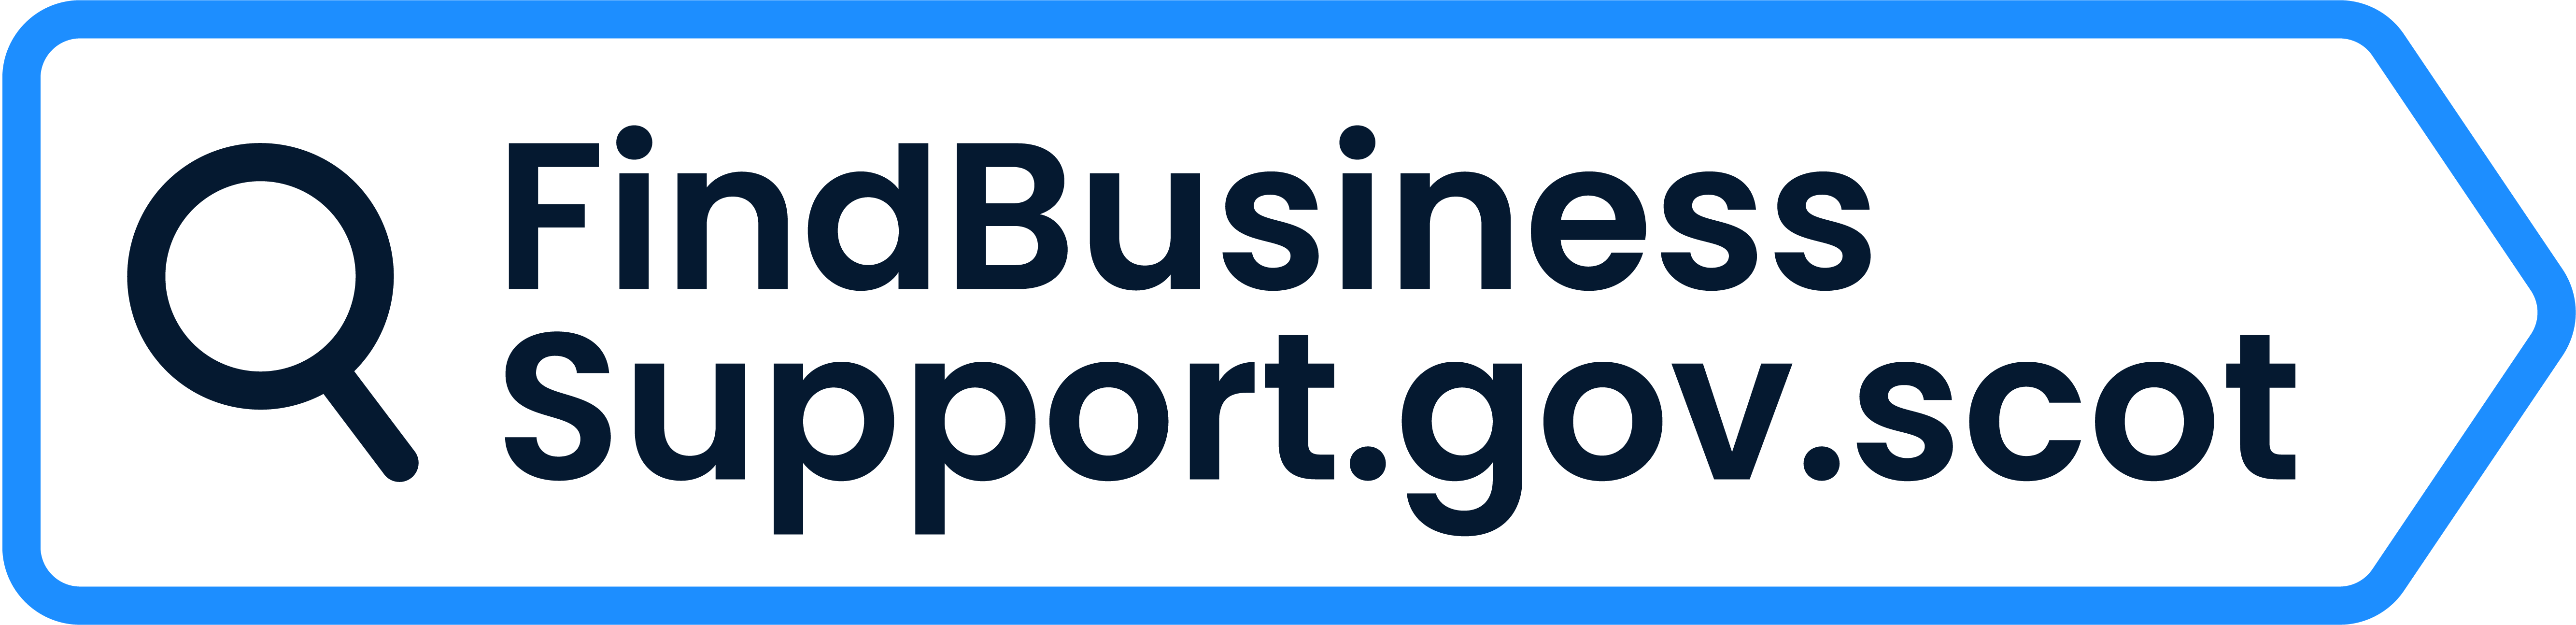 FindBusinessSupport.gov.uk written on a  road sign pointing to the right